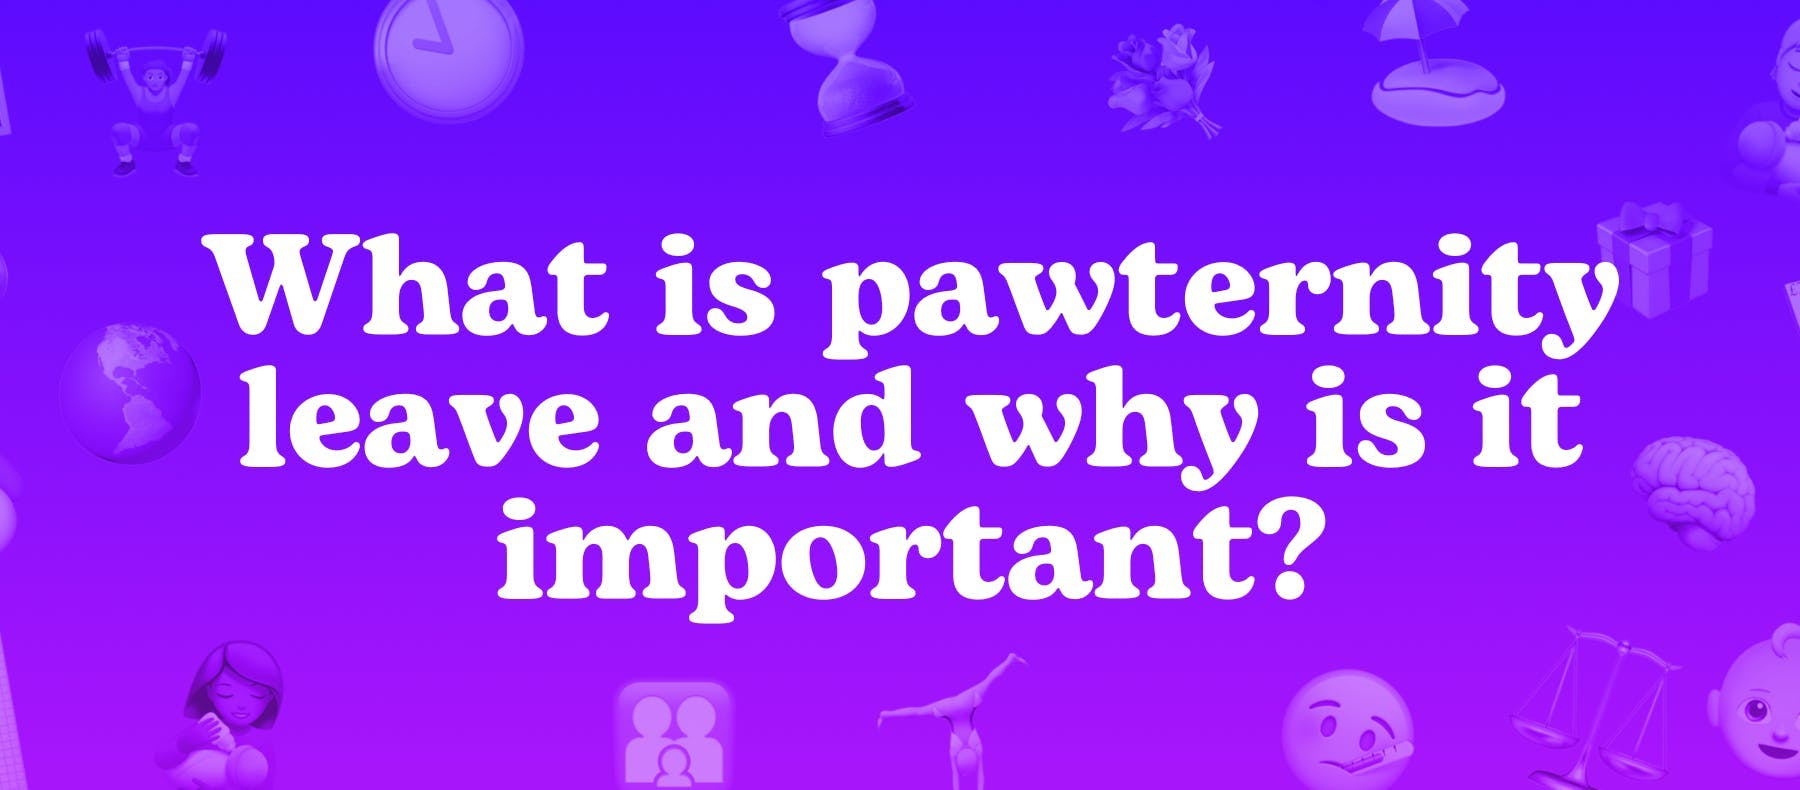 What is pawternity leave and why is it important?